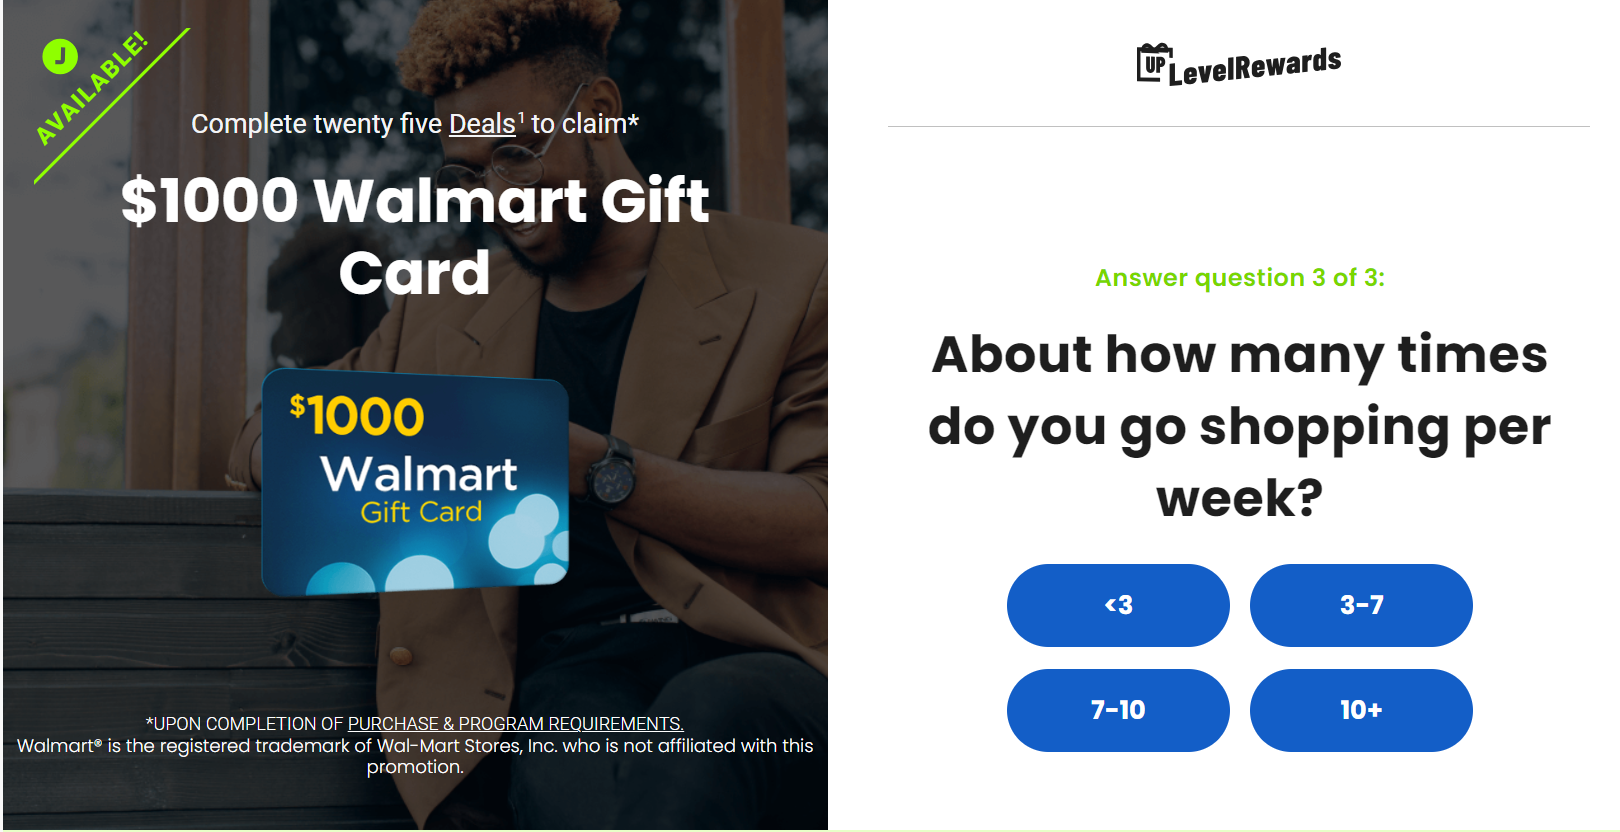 Paypal gift card giveaway, Paypal gift card wiveway usa, Paypal gift card giveaway in the usa, PayPal gift Cards, Get $1000 Paypal Gift card, Best Gift card giveaway, Best gift card in usa, How Do You Get PayPal $1000 Gift Card, Free $1000 PayPal Gift Card, Get a free a PayPal $100, How to get a Free $1000 Paypal Gift Card in usa, Is Paypal Giving Away $1000 Gift Card Rewards by Email?, What is the $1000 PayPal Gift Card Giveaway?, Benefits of PayPal Gift Cards, Get a $1000 Paypal gift Card Now, Tips to Increase Your Chances of Winning Paypal gift Card, Promotional Strategies for PayPal Gift Card Giveaway, Get a $1000 PayPal Gift Card Post-Giveaway, Usa money card, 